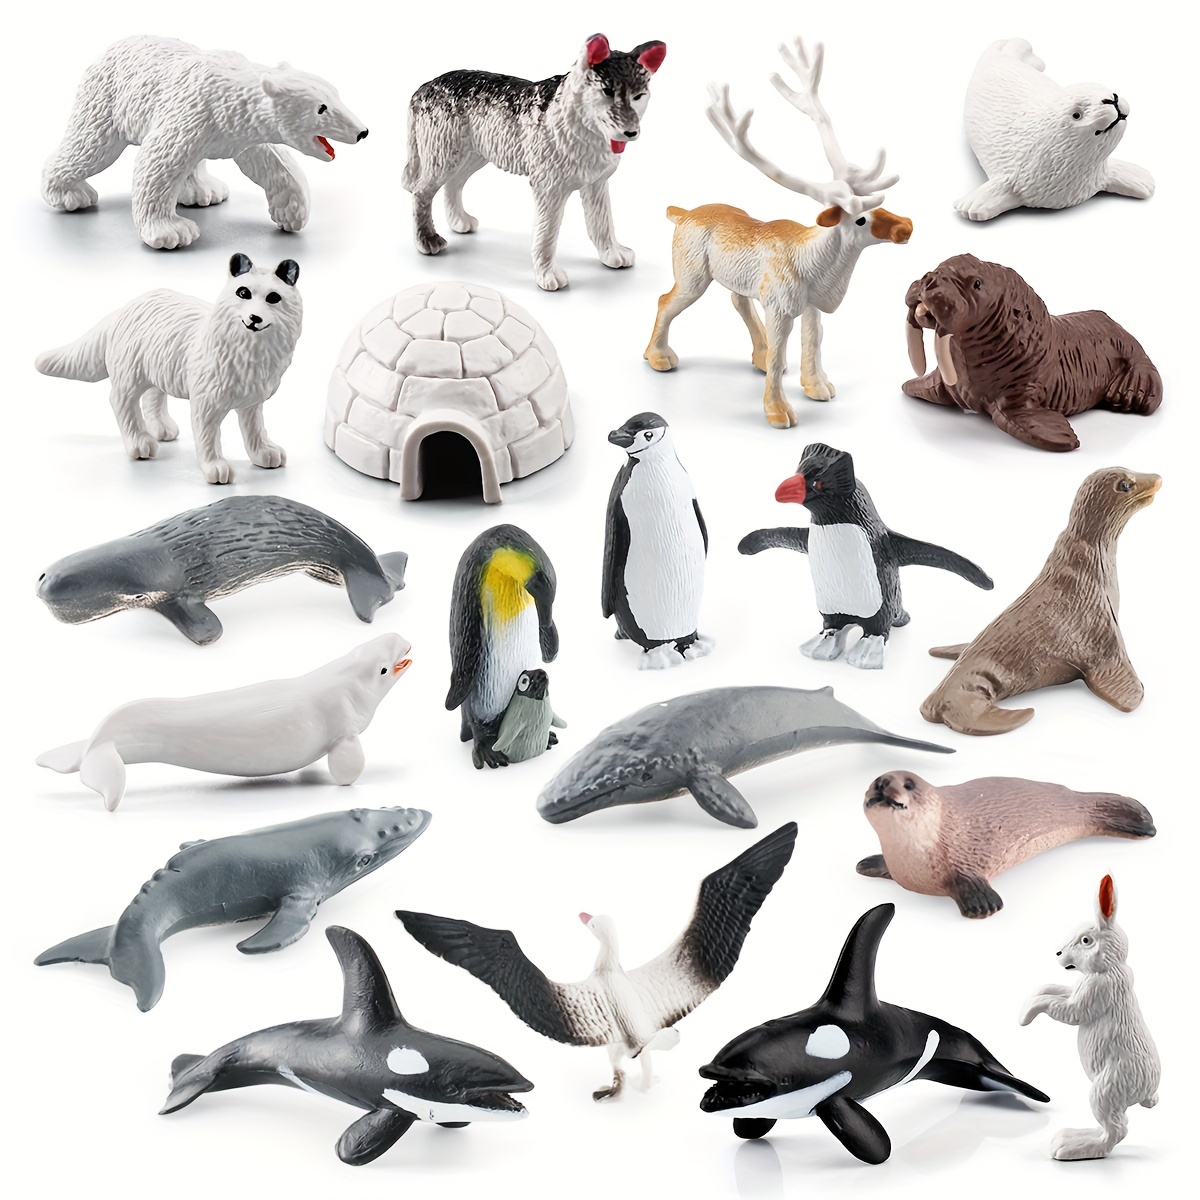 

Discover lifelike models of animals from the Arctic and Antarctic, including rabbits, foxes, seals, beluga whales, and penguins. Perfect as desktop decorations, toys, or Easter gifts.